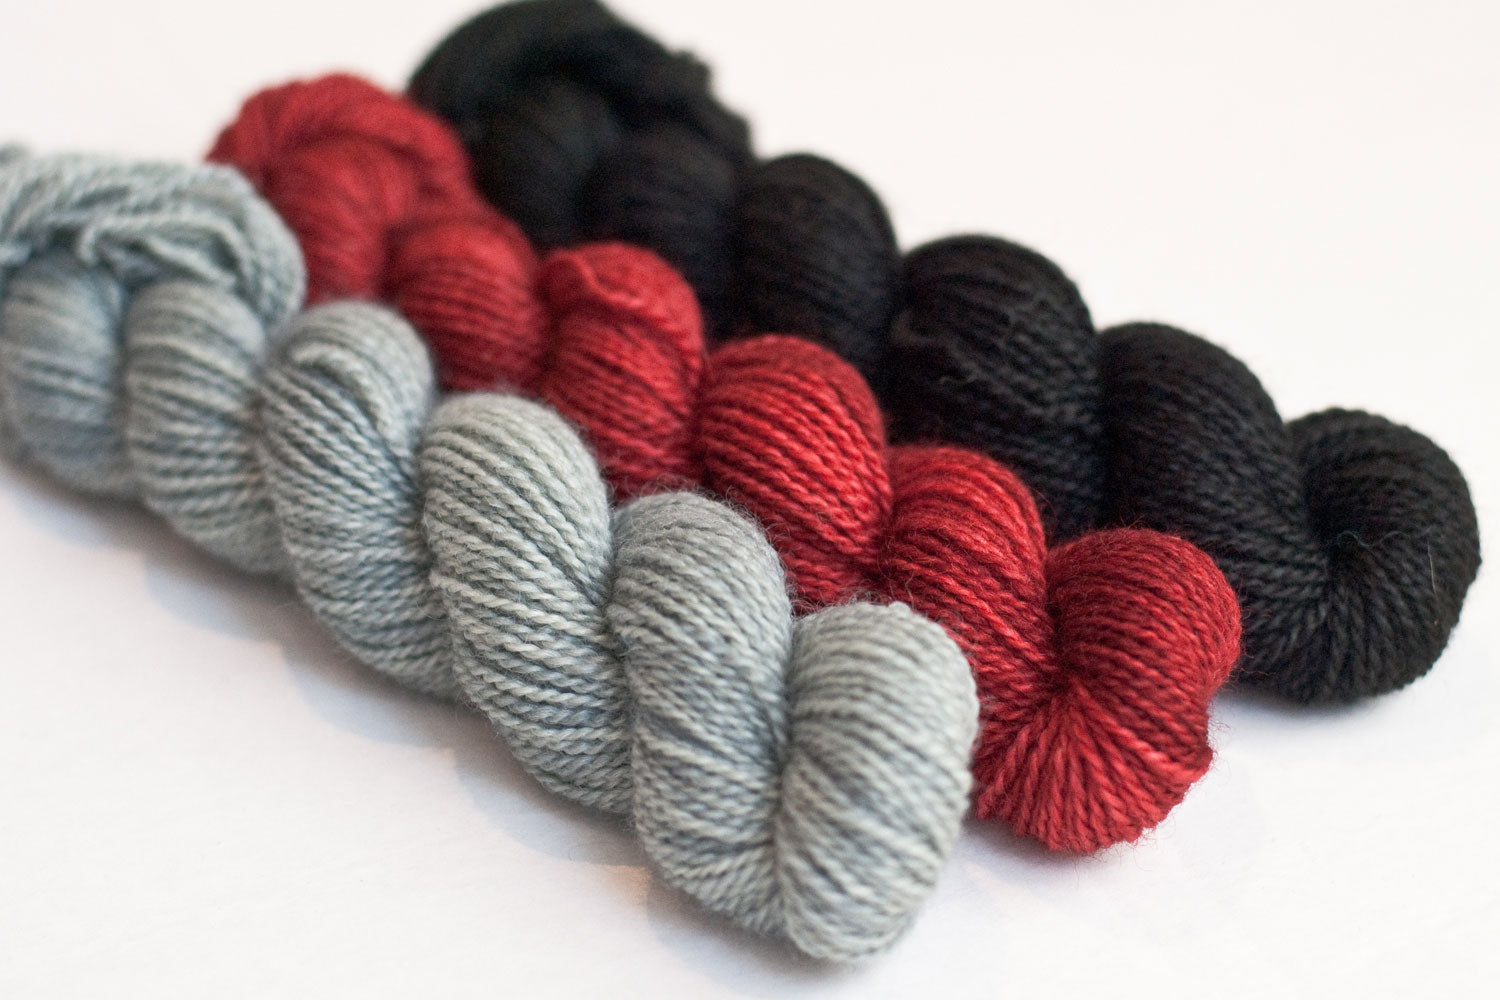 Dark gnome yarn set of three mini-skeins in grey, red and black, for gnomei mystery knitalong 9 with Imagined Landscapes